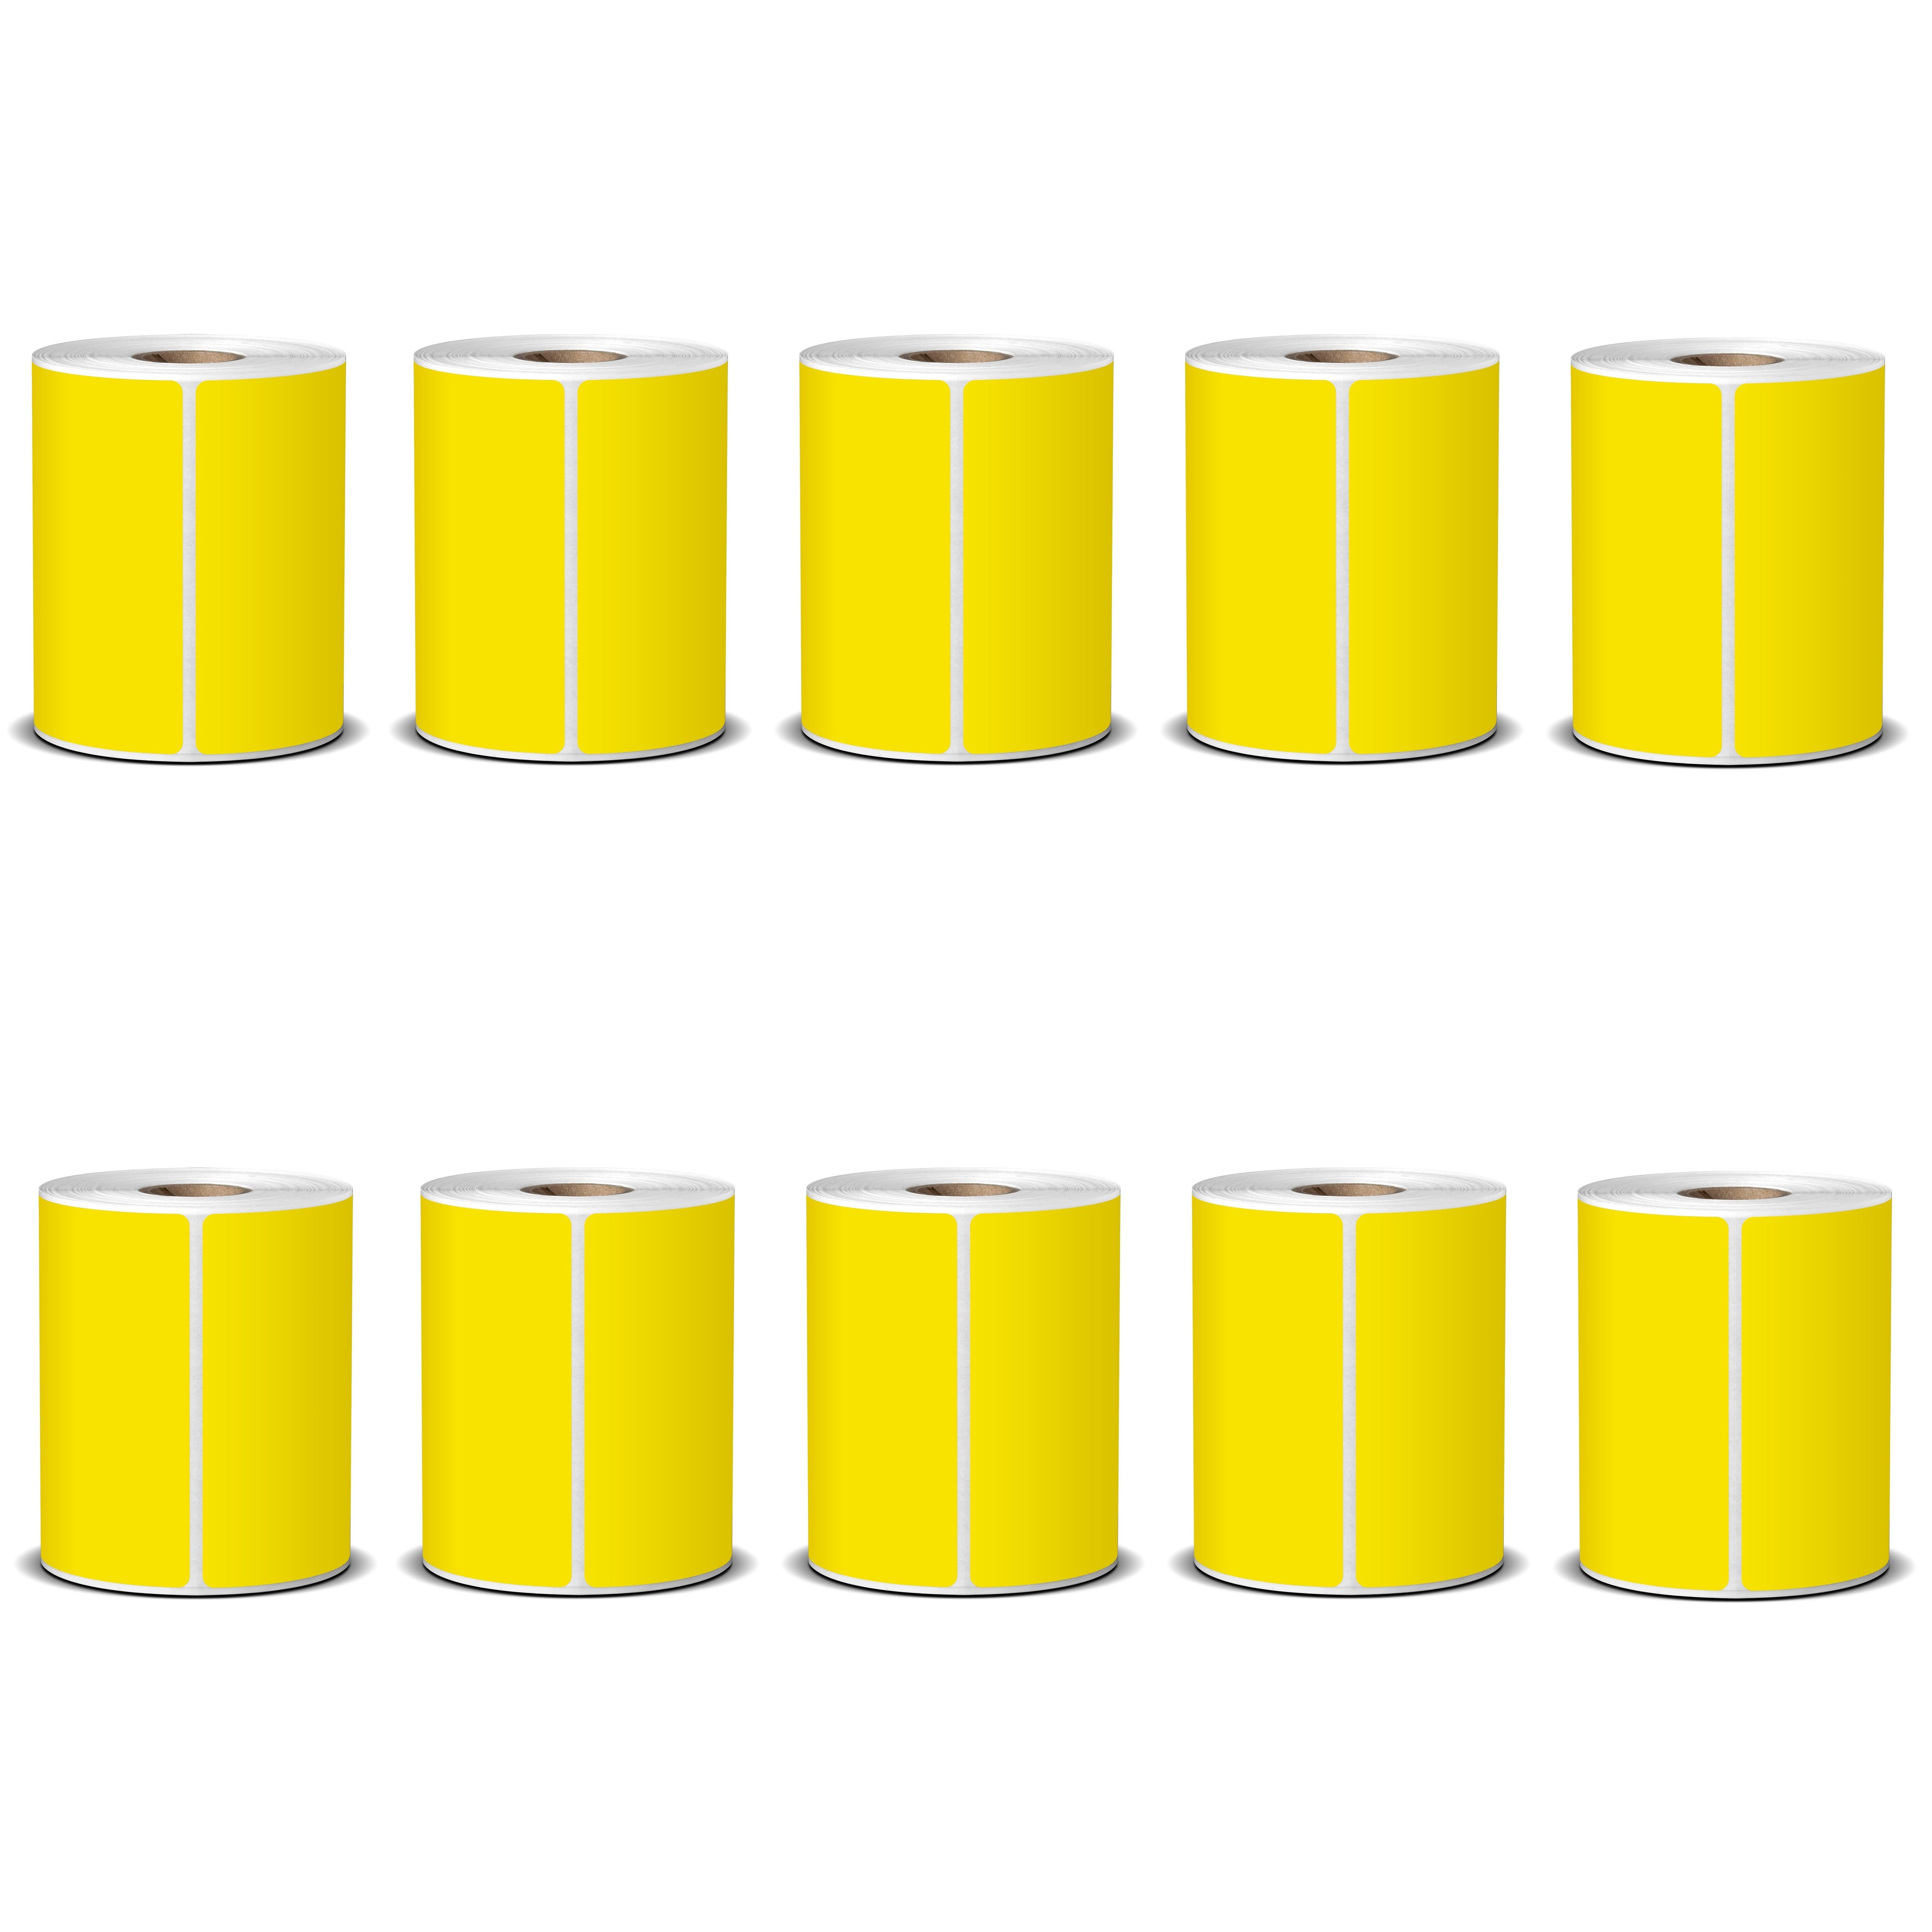 100X150 Yellow Direct Thermal Labels 400/Roll - 10 Rolls